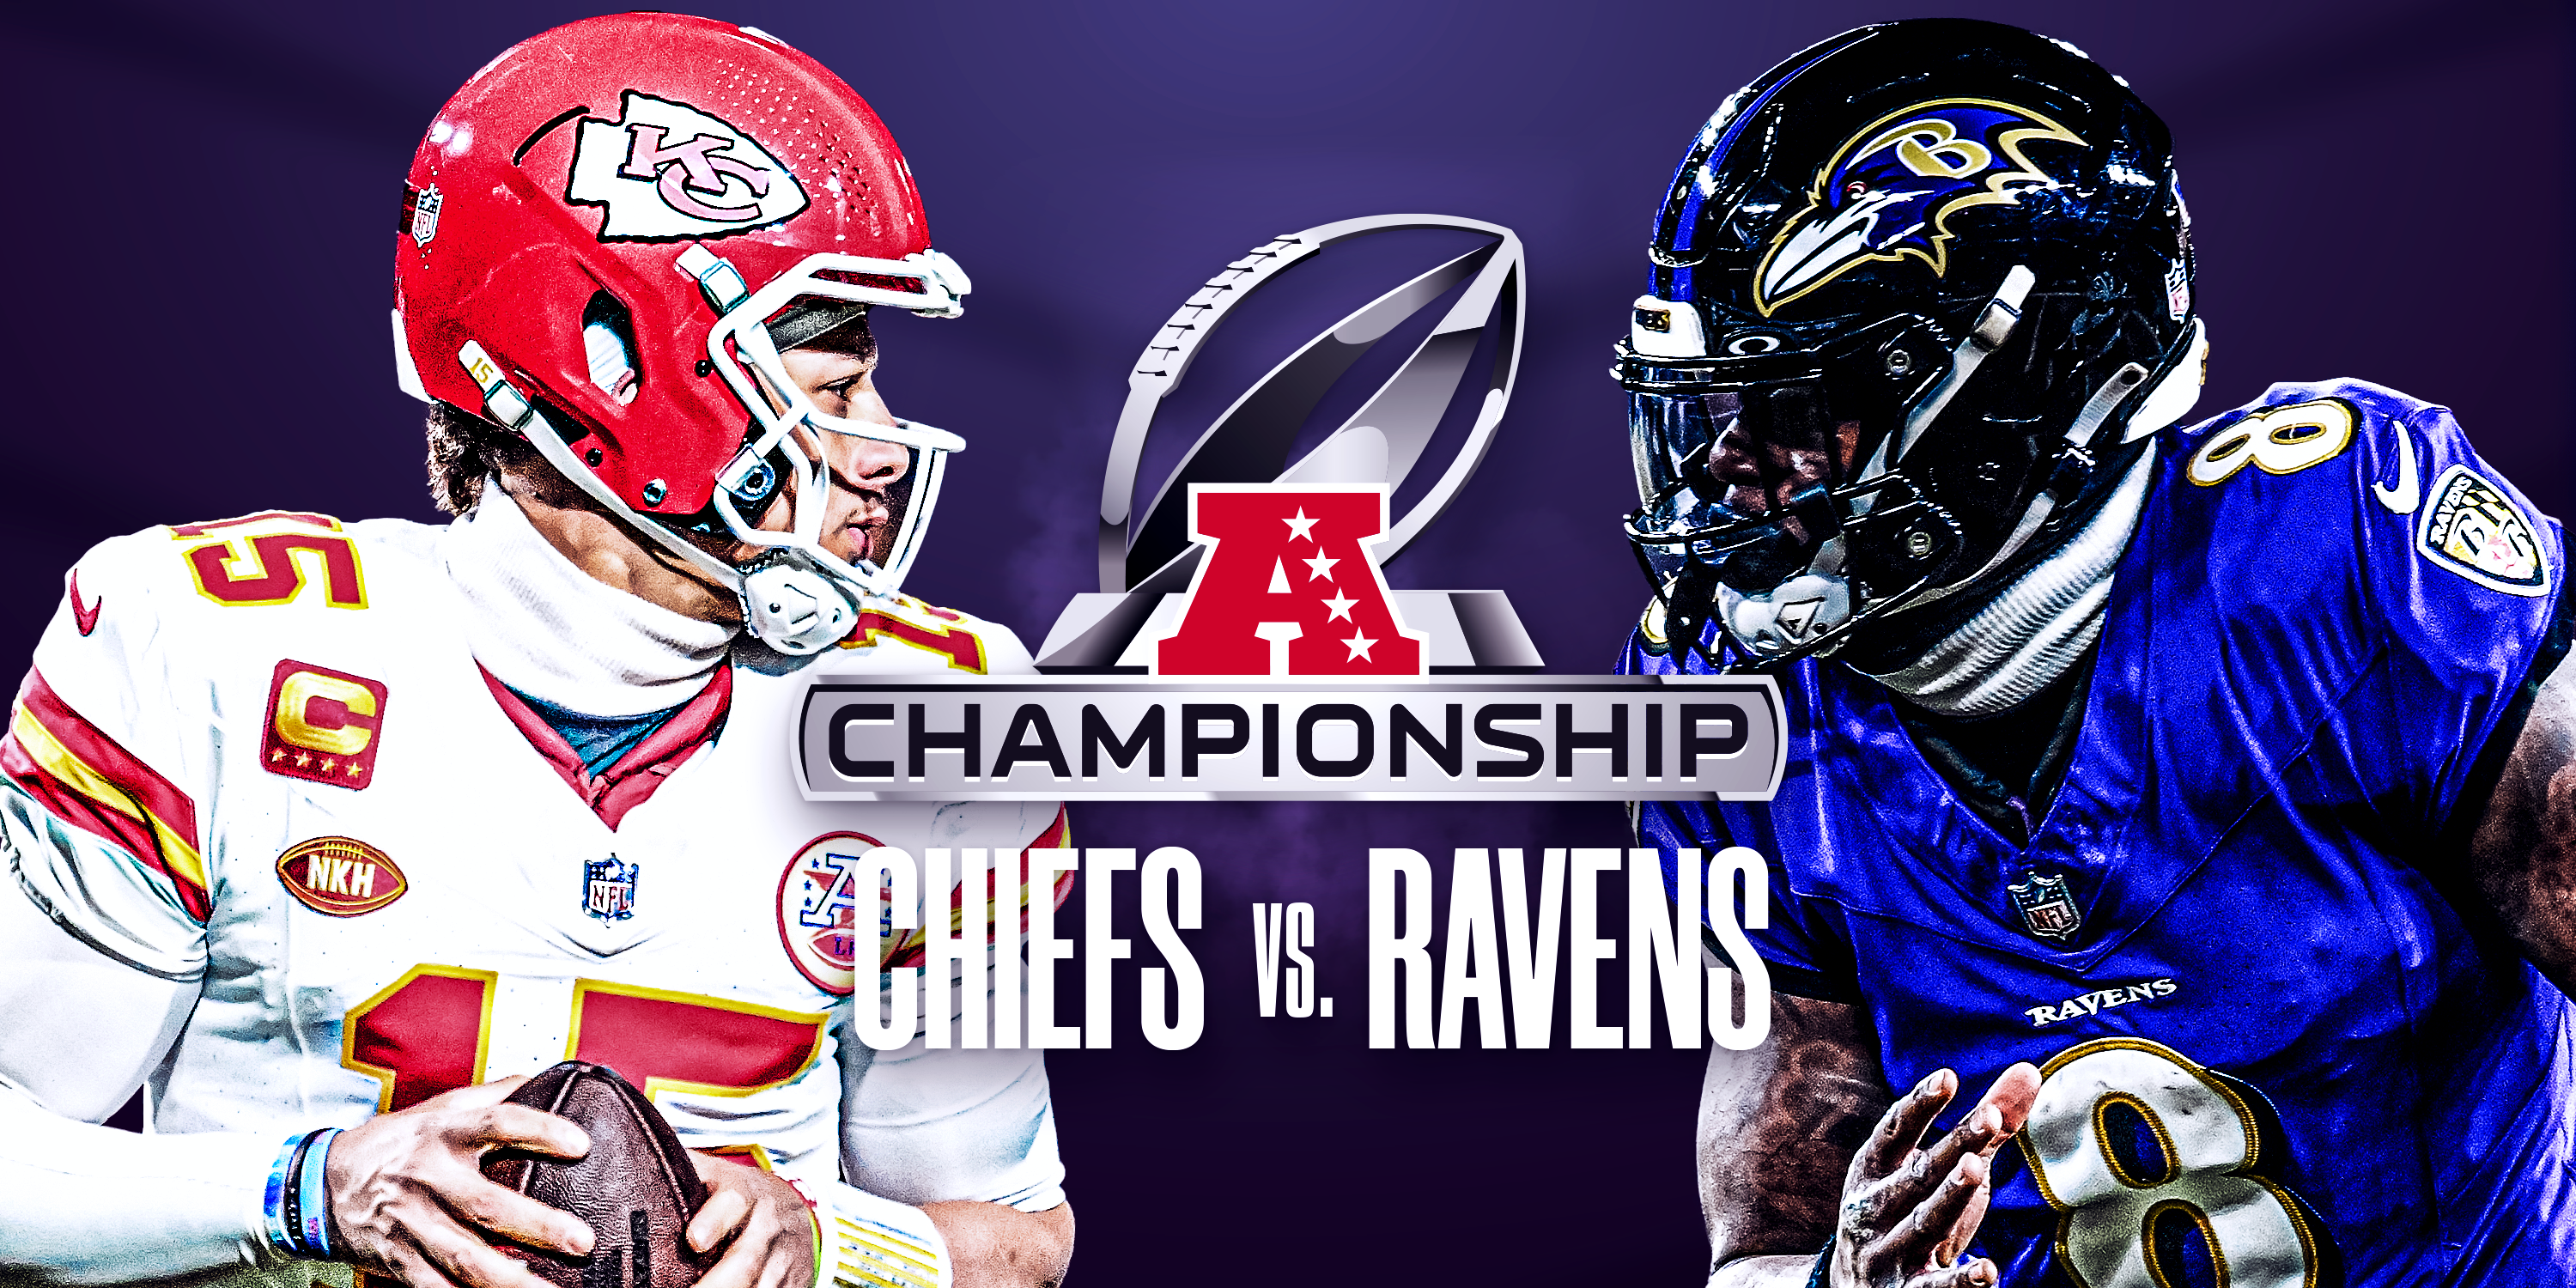 AFC Championship Game predictions